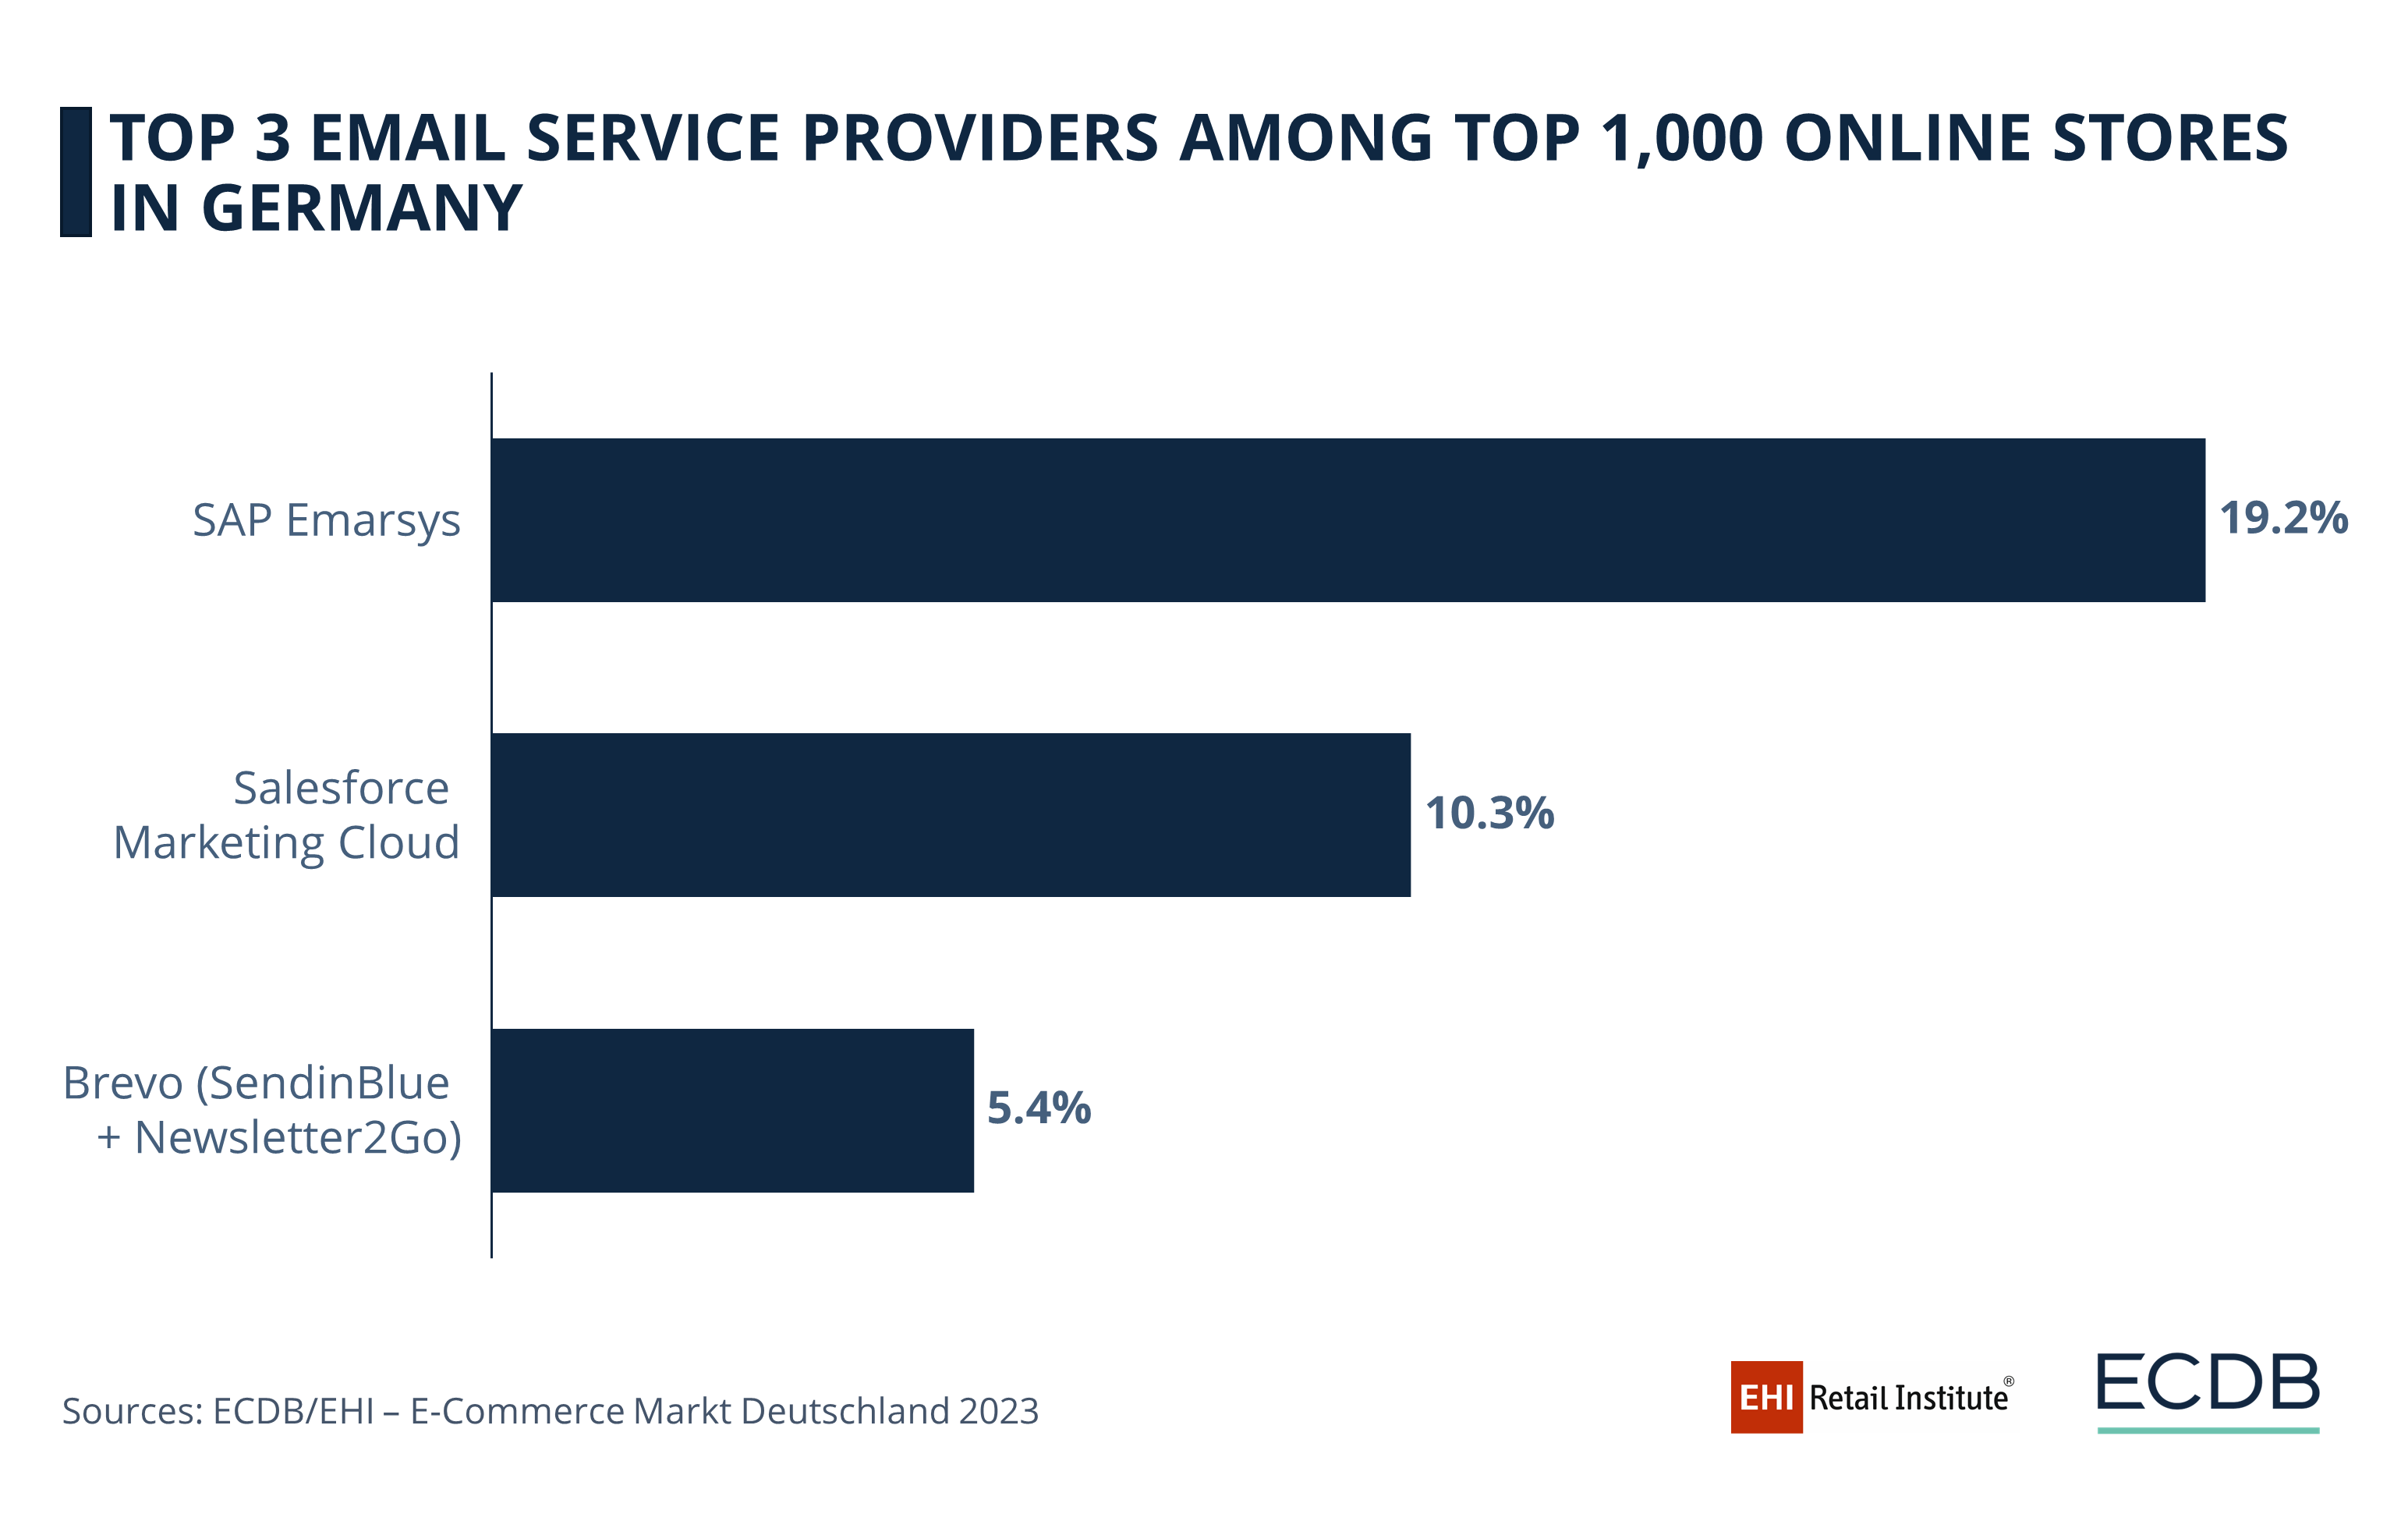 Top 3 Email Service Providers Among Top 1,000 Online Stores in Germany